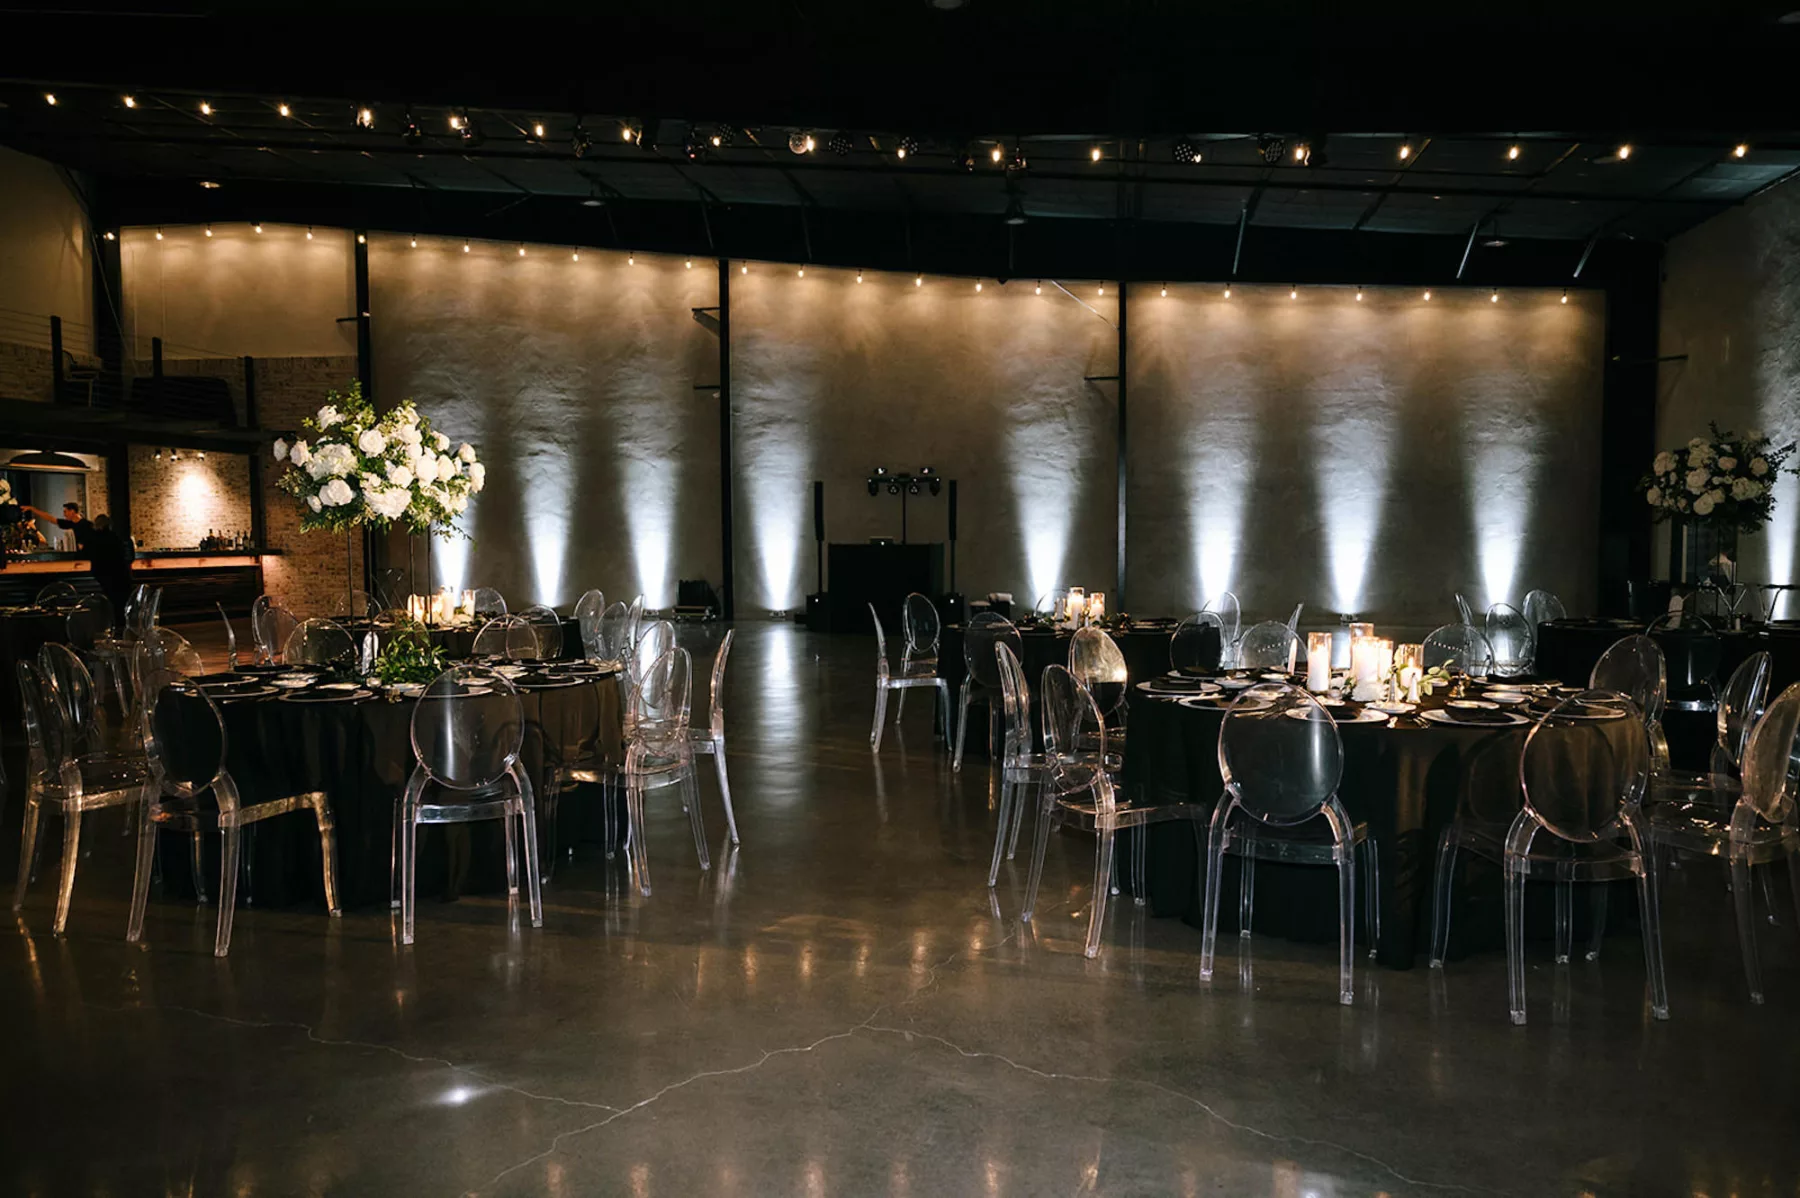 Moody Modern Black and White Wedding Reception Decor Ideas with Acrylic Ghost Chairs | Tampa Venue White Rock Canyon 